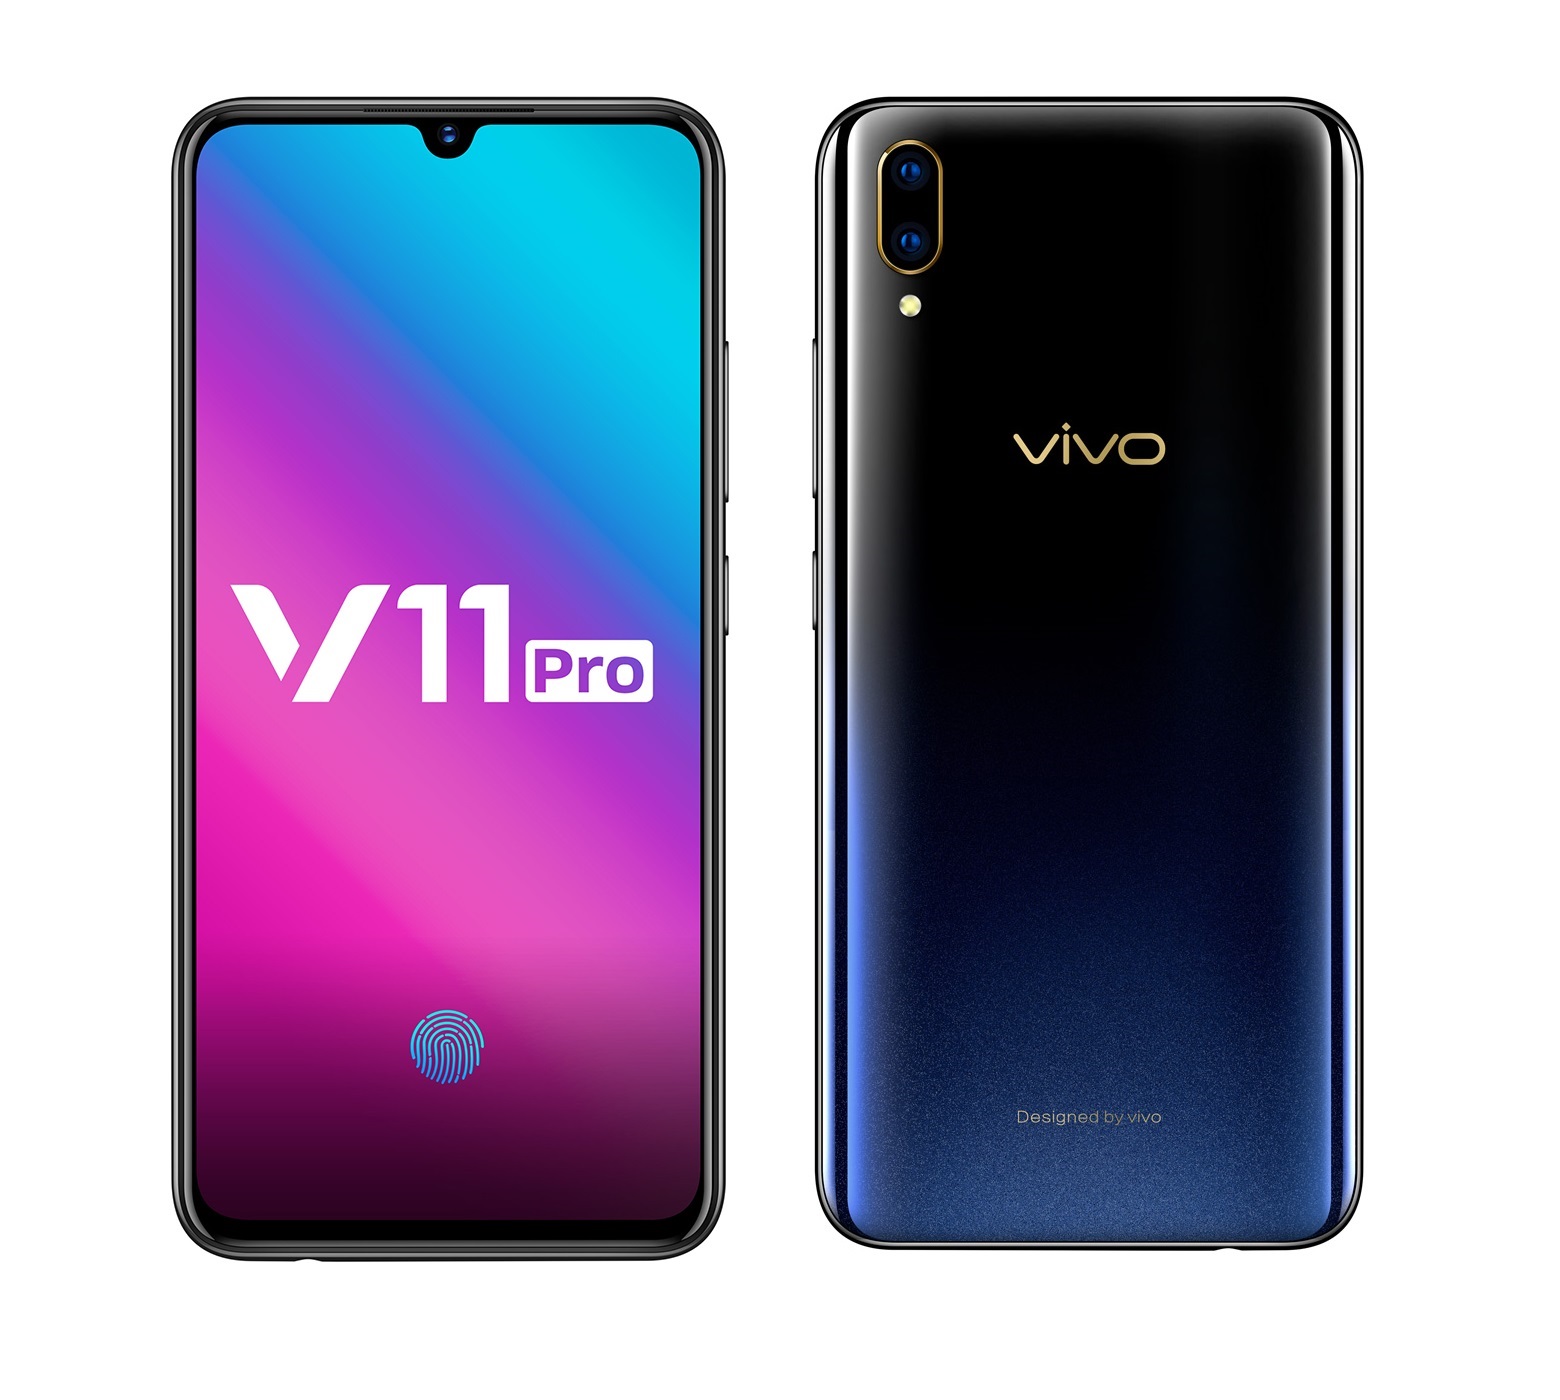 Vivo V11 Pro Smartphone with 6GB RAM, 64GB Internal Memory and 4G LTE Connectivity